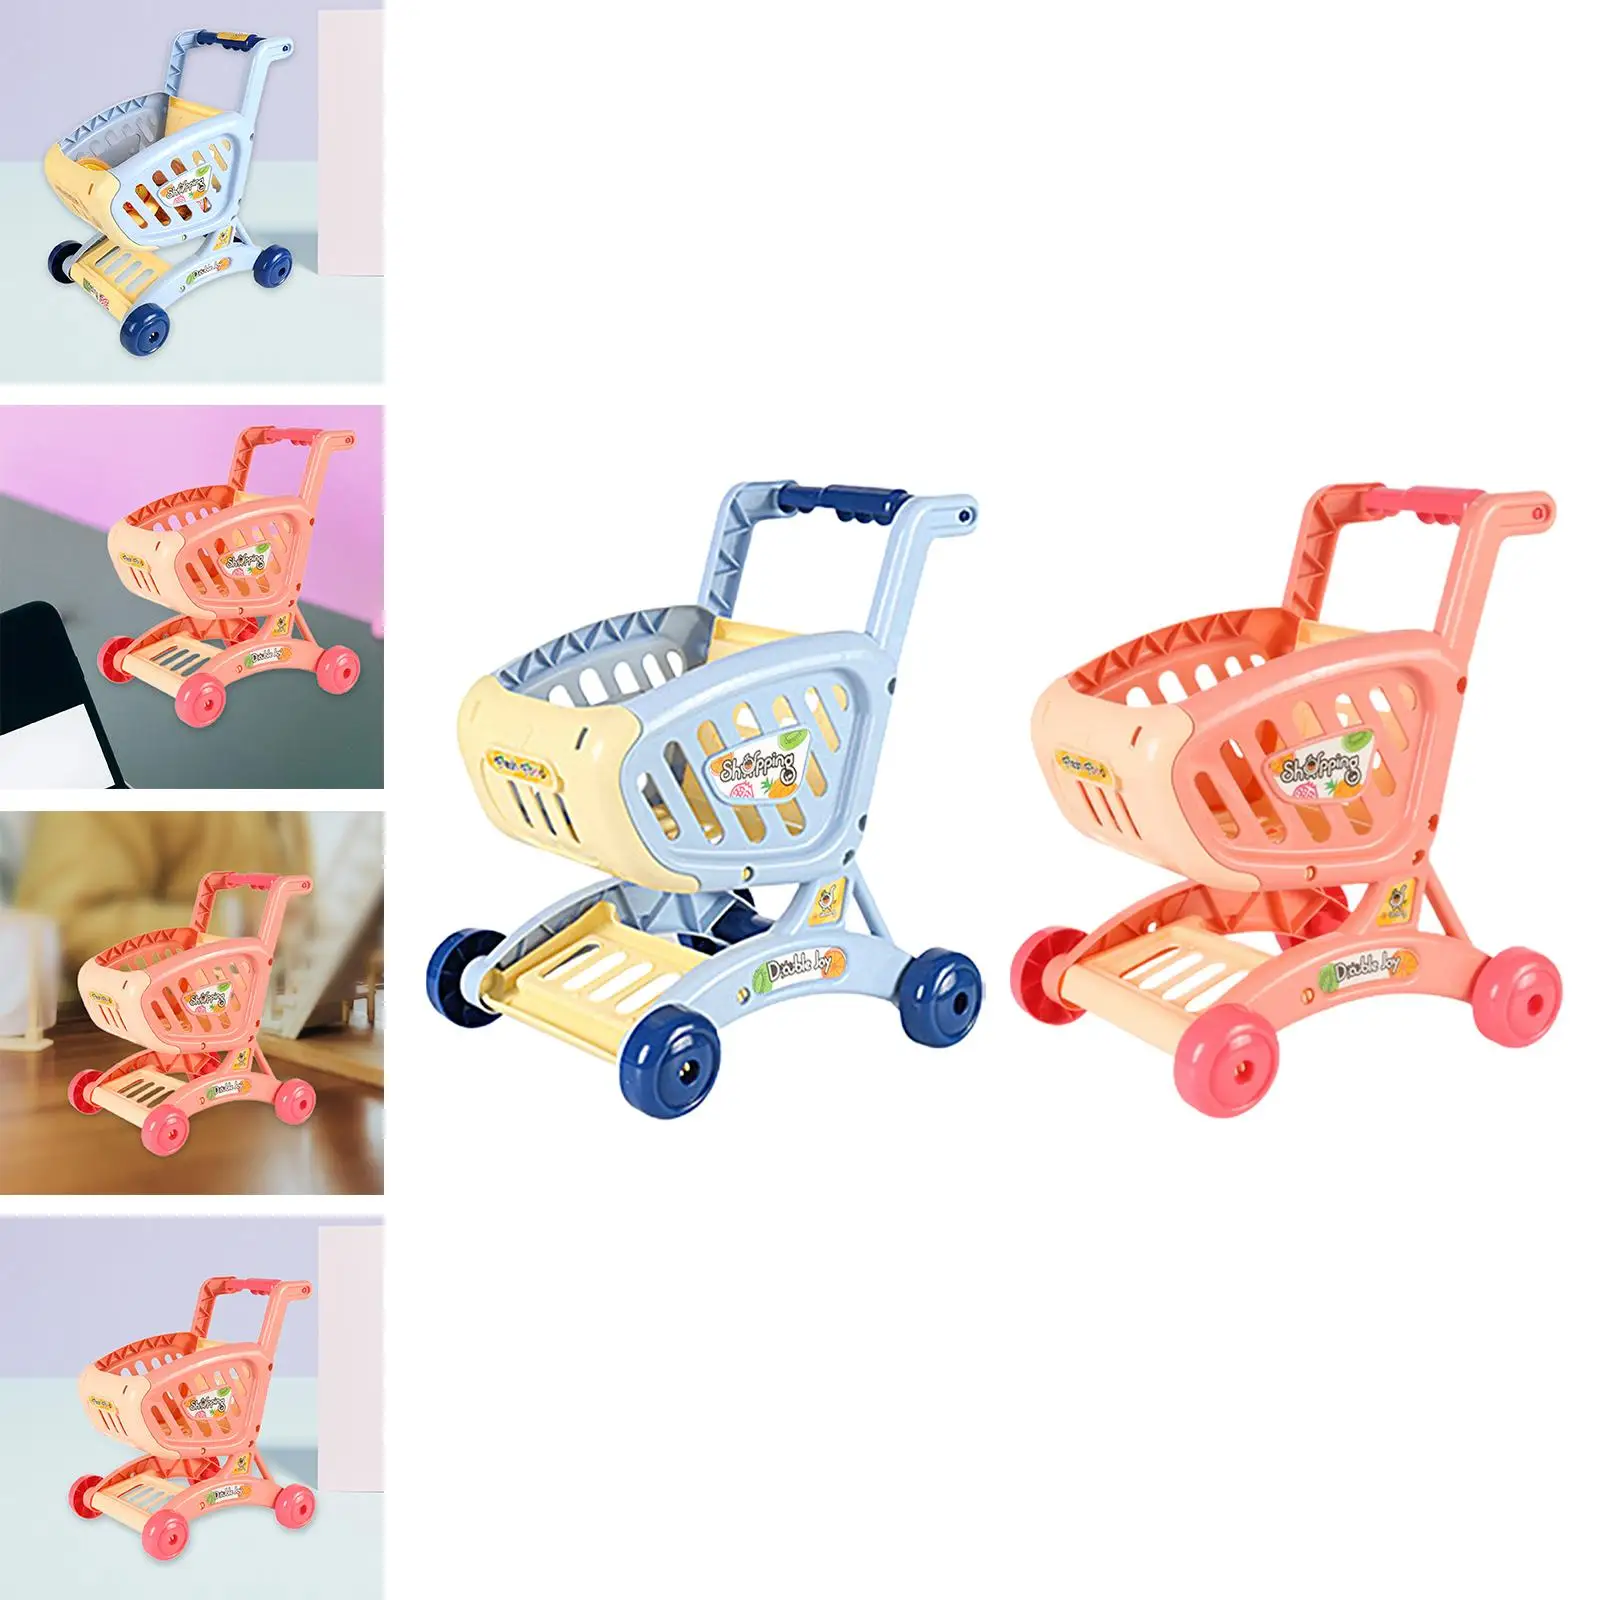 Supermarket Trolley Creative Toys Learning Development Shop Grocery Cart for Toddlers Kids Girls and Boys Ages 3 and up Baby images - 6